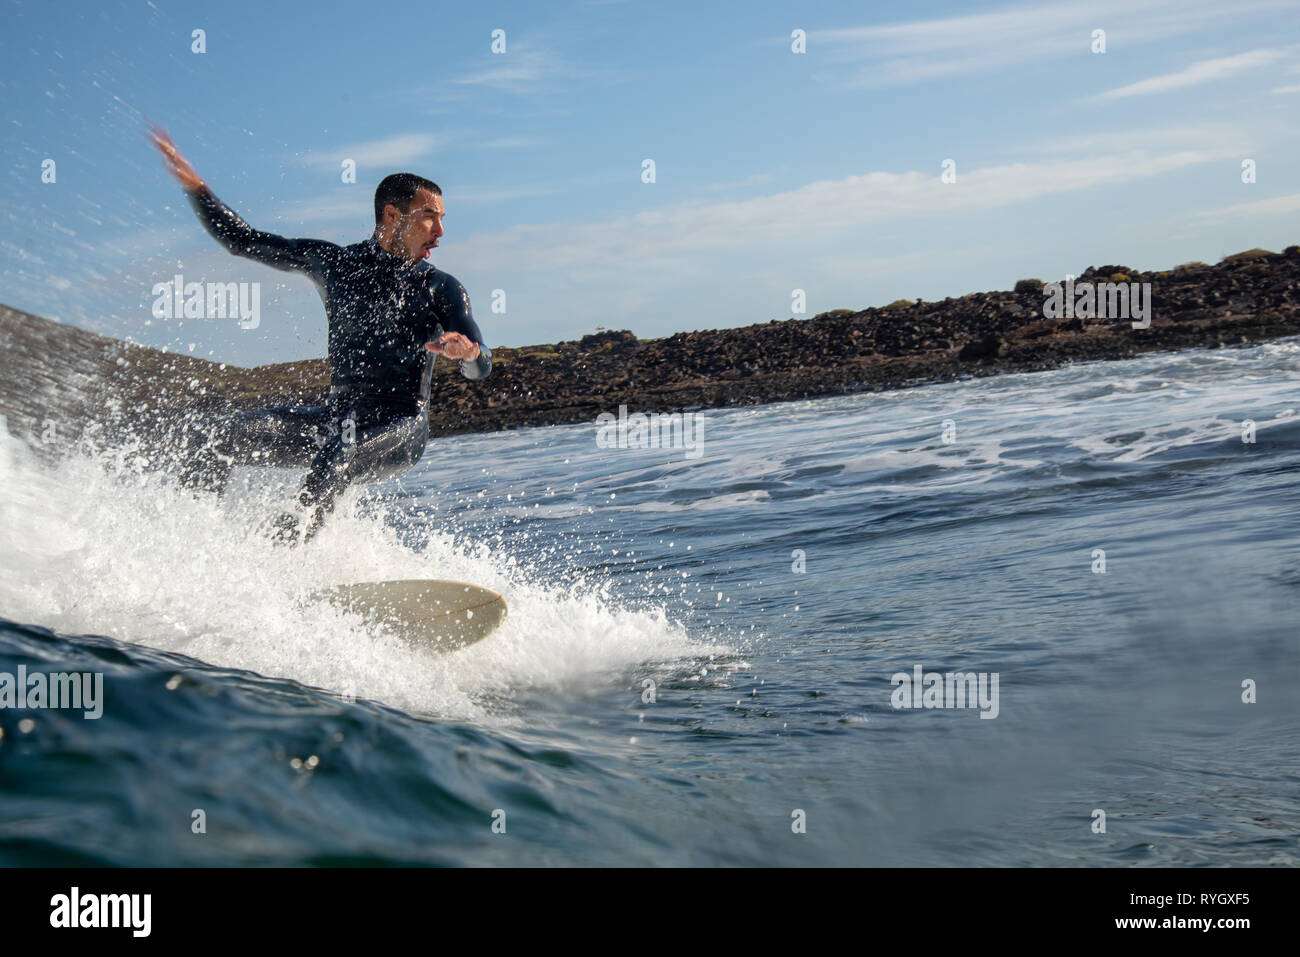 surfer riding waves on the island of fuerteventura in the Atlantic Ocean Stock Photo